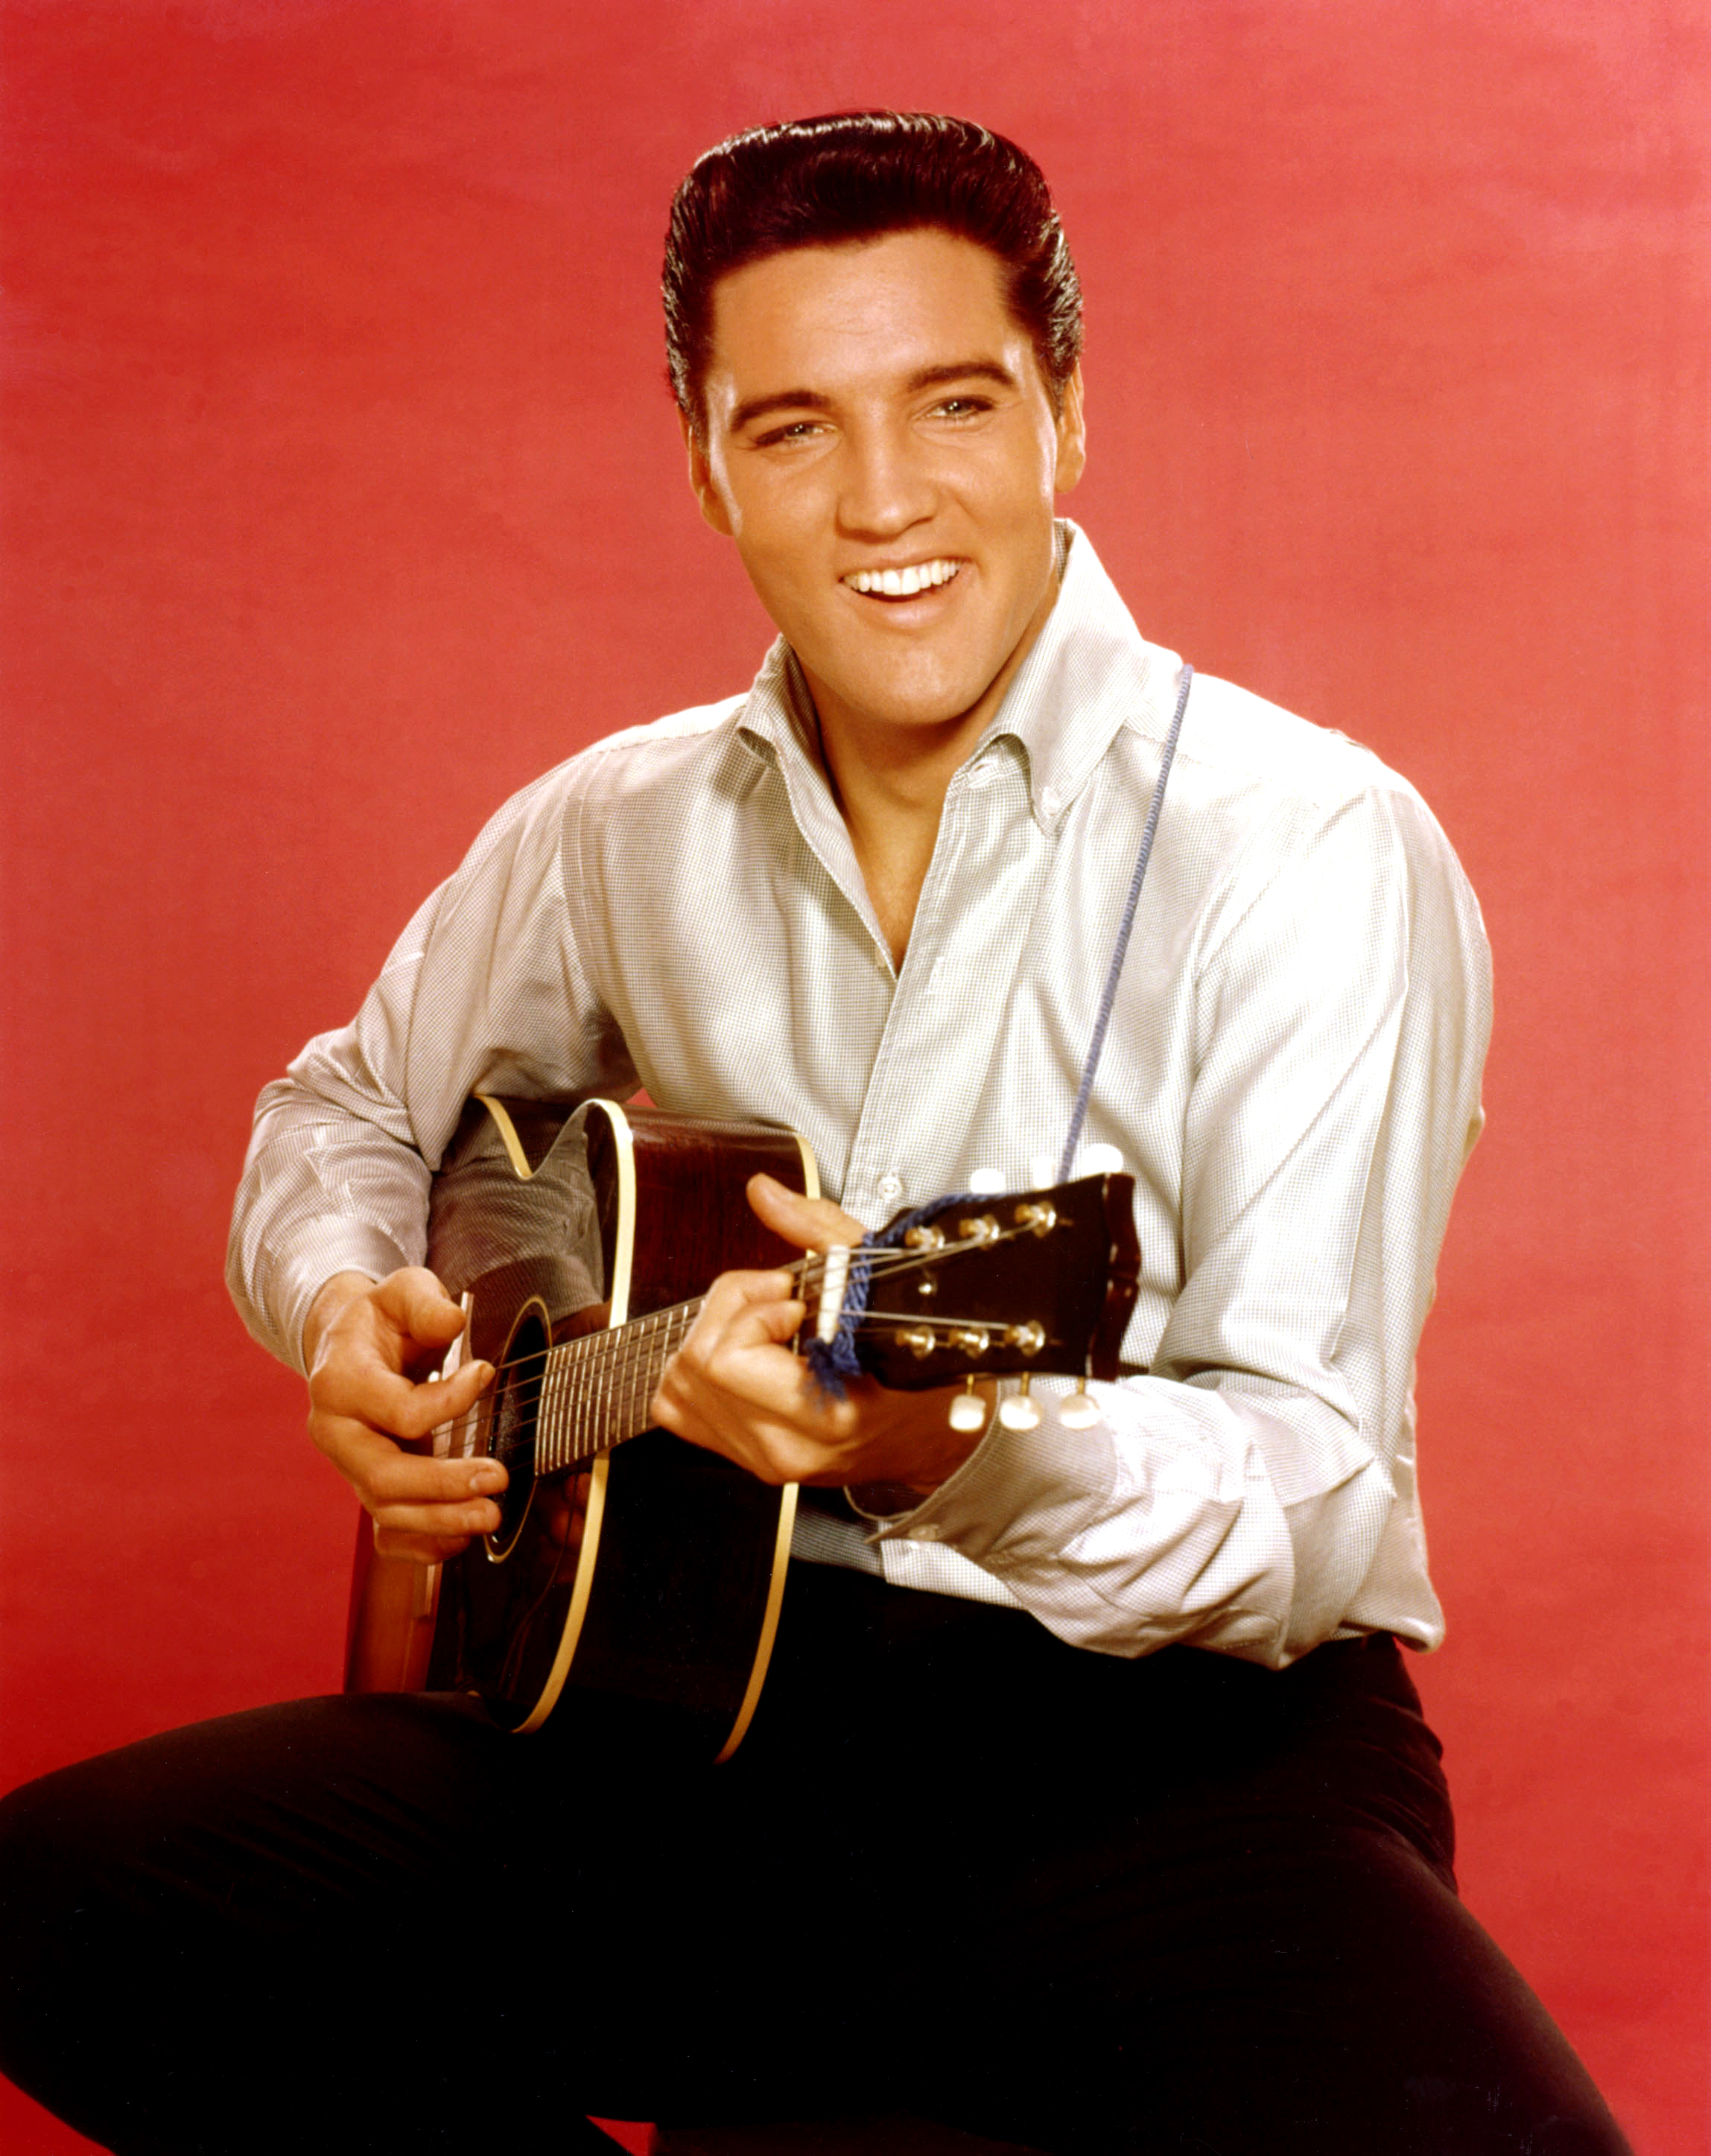 Elvis Presley in Culver City, California at MGM Studios in 1962 | Source: Getty Images